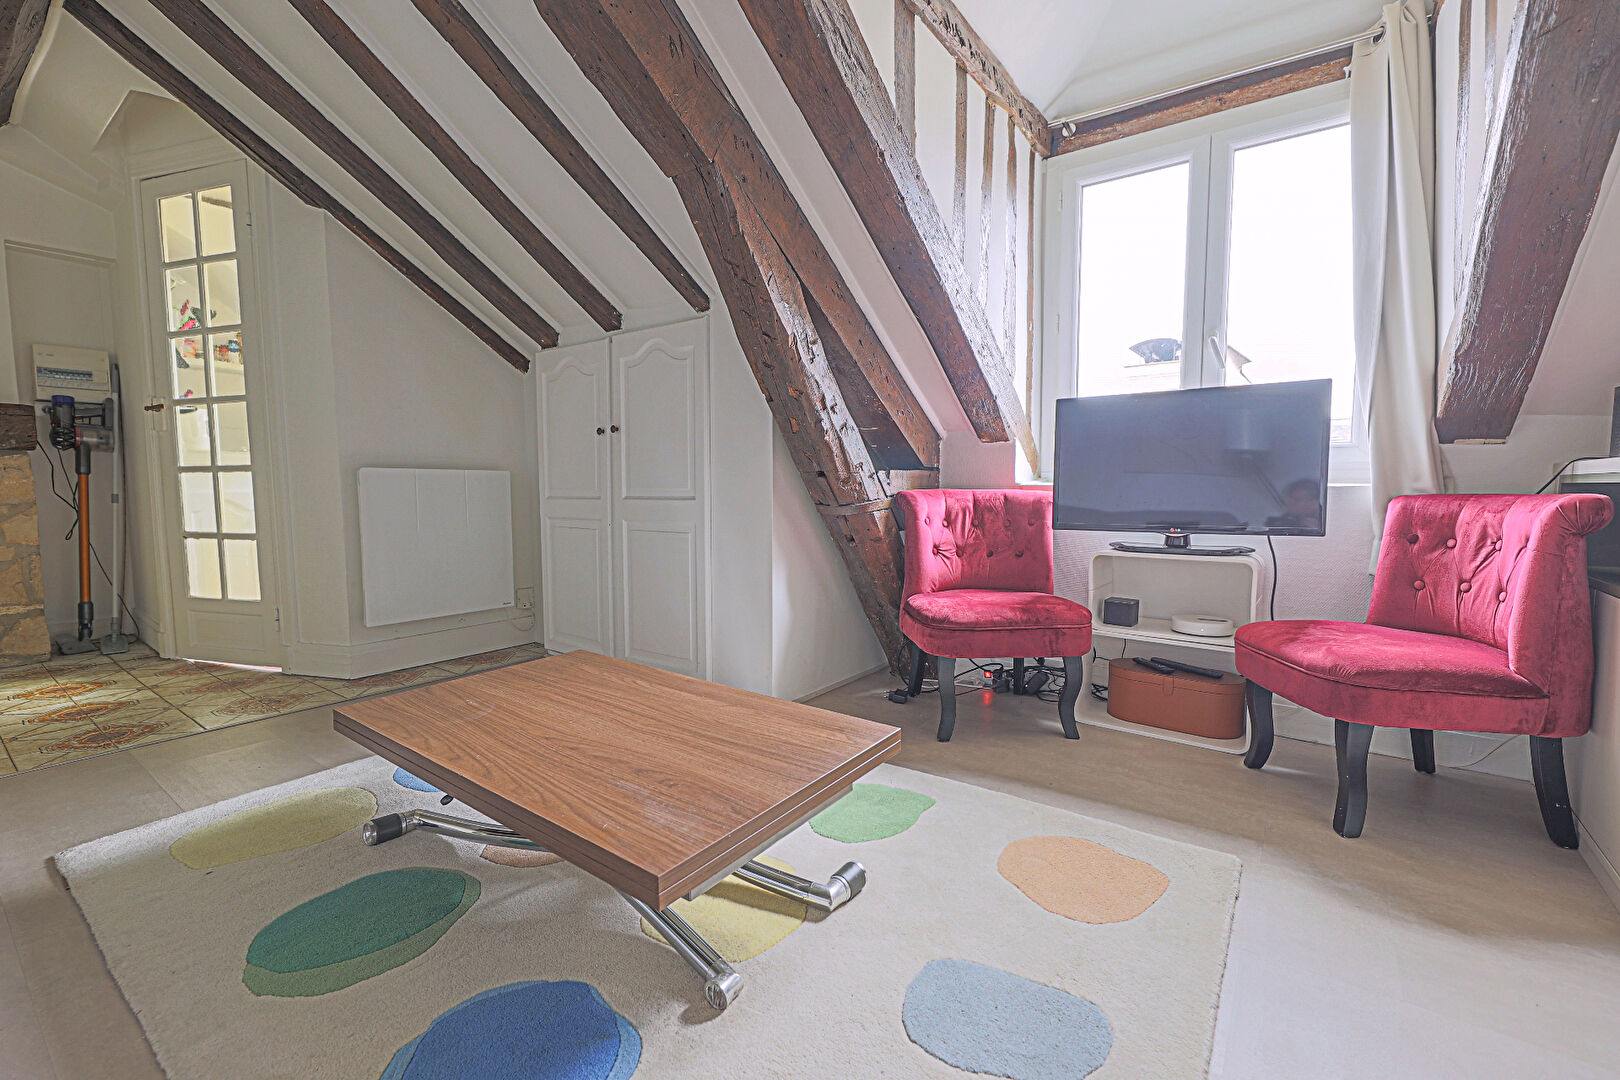 Exceptional: in the heart of the Marais, magnificent last floor studio with clear view: exceptional place to visit urgently! 2